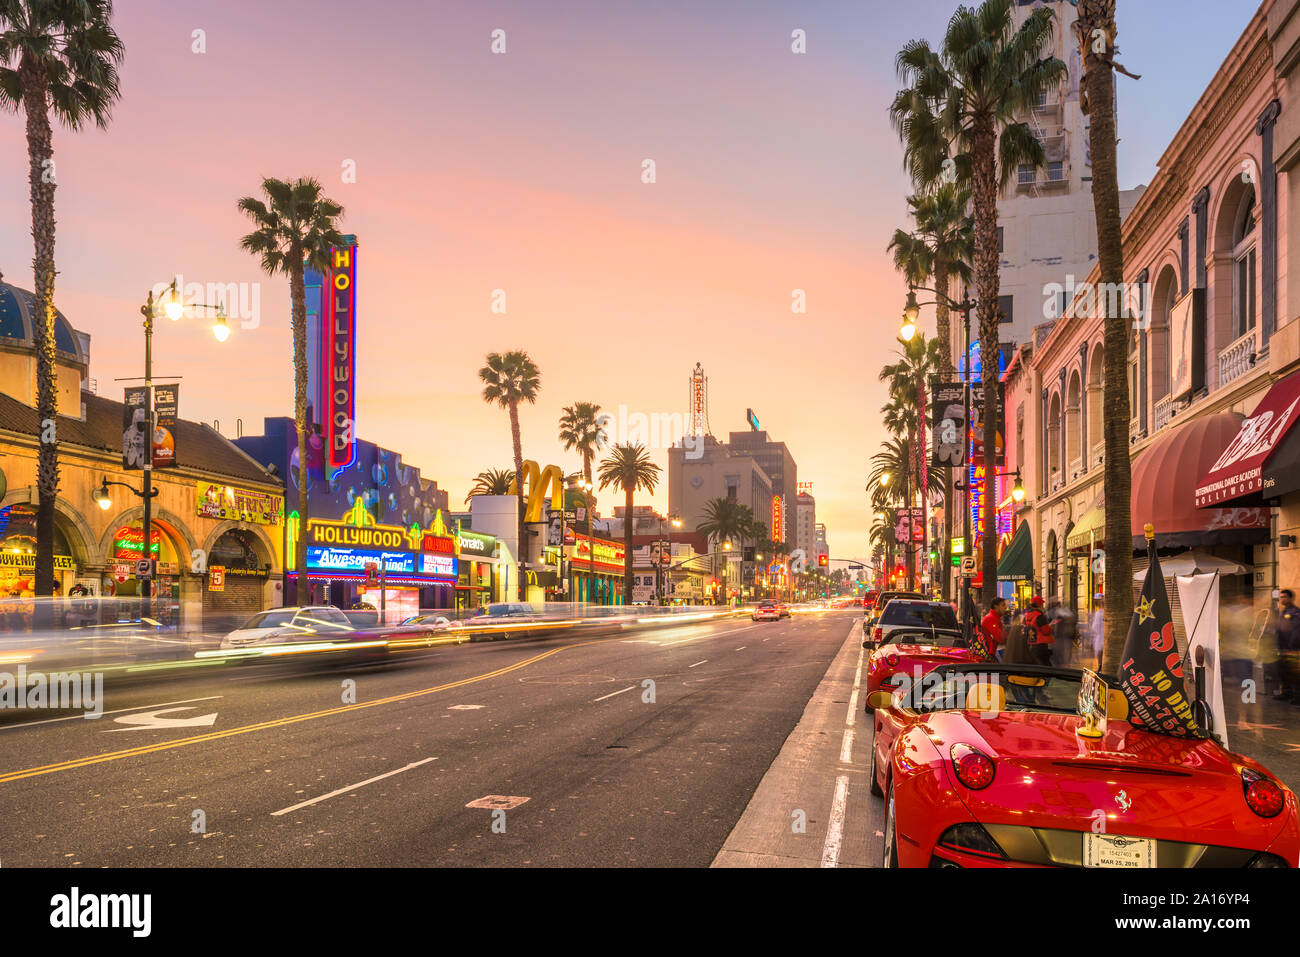 LOS ANGELES, CALIFORNIA - MARCH 1, 2016: Traffic on Hollywood Boulevard at dusk. The theater district is famous tourist attraction. Stock Photo